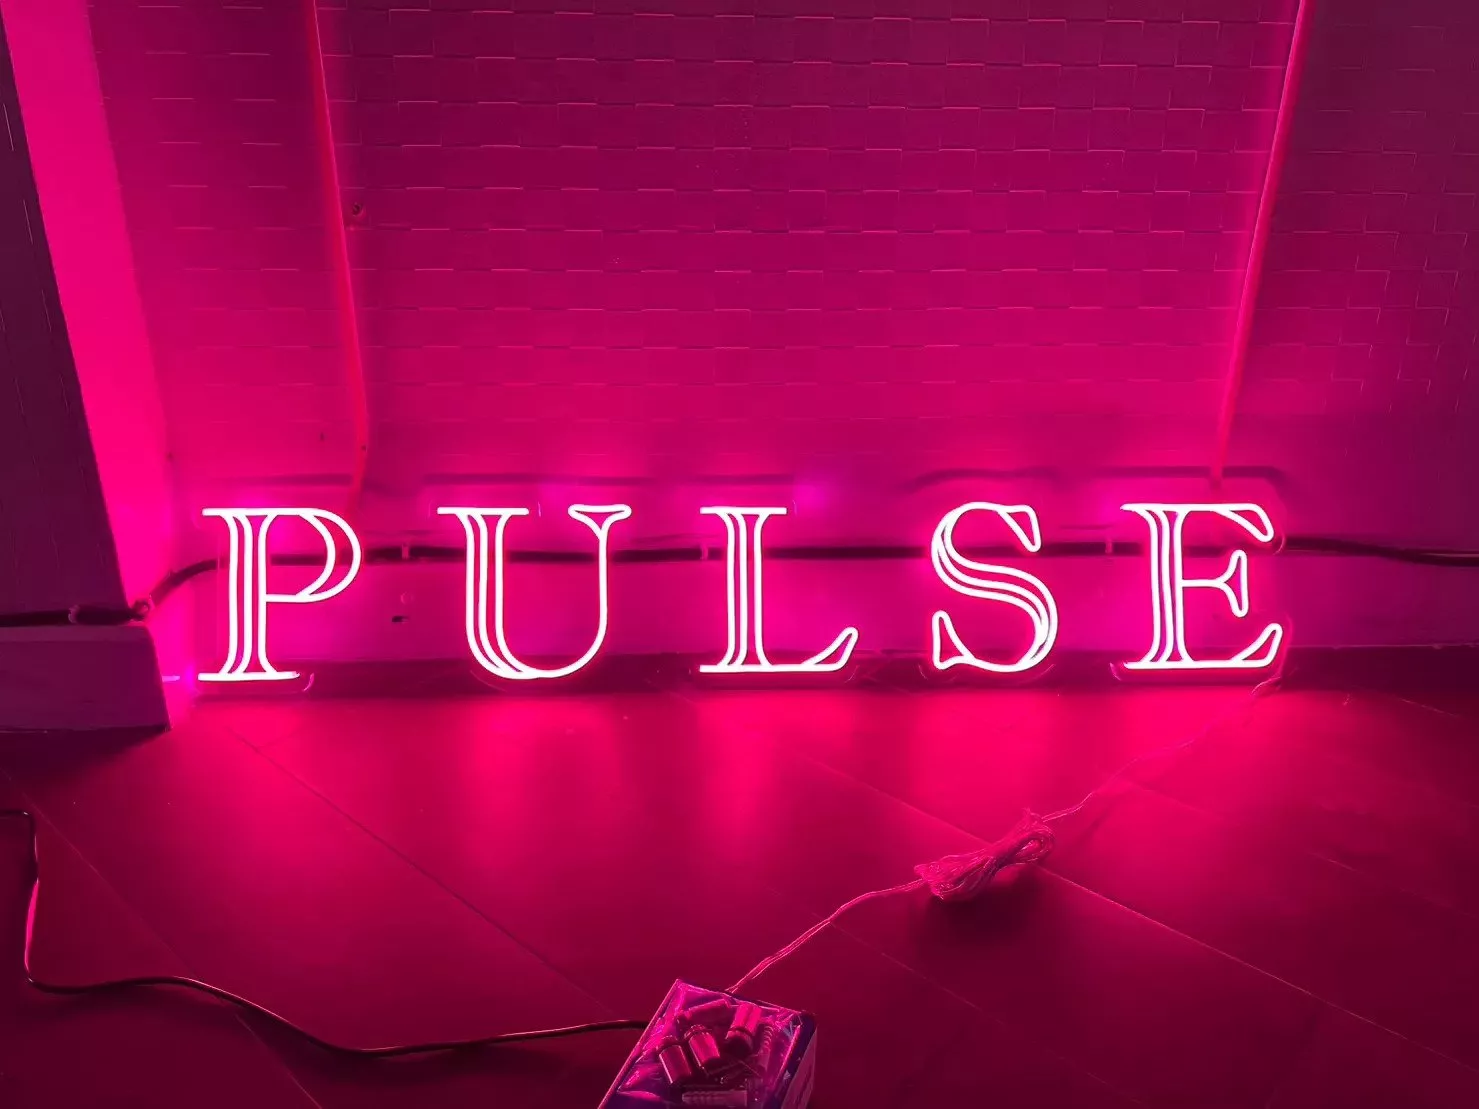 PULSE CITY GUIDE: TOBY'S IN SUKHUMVIT 38  PULSE CLINIC - Asia's Leading  Sexual Healthcare Network.